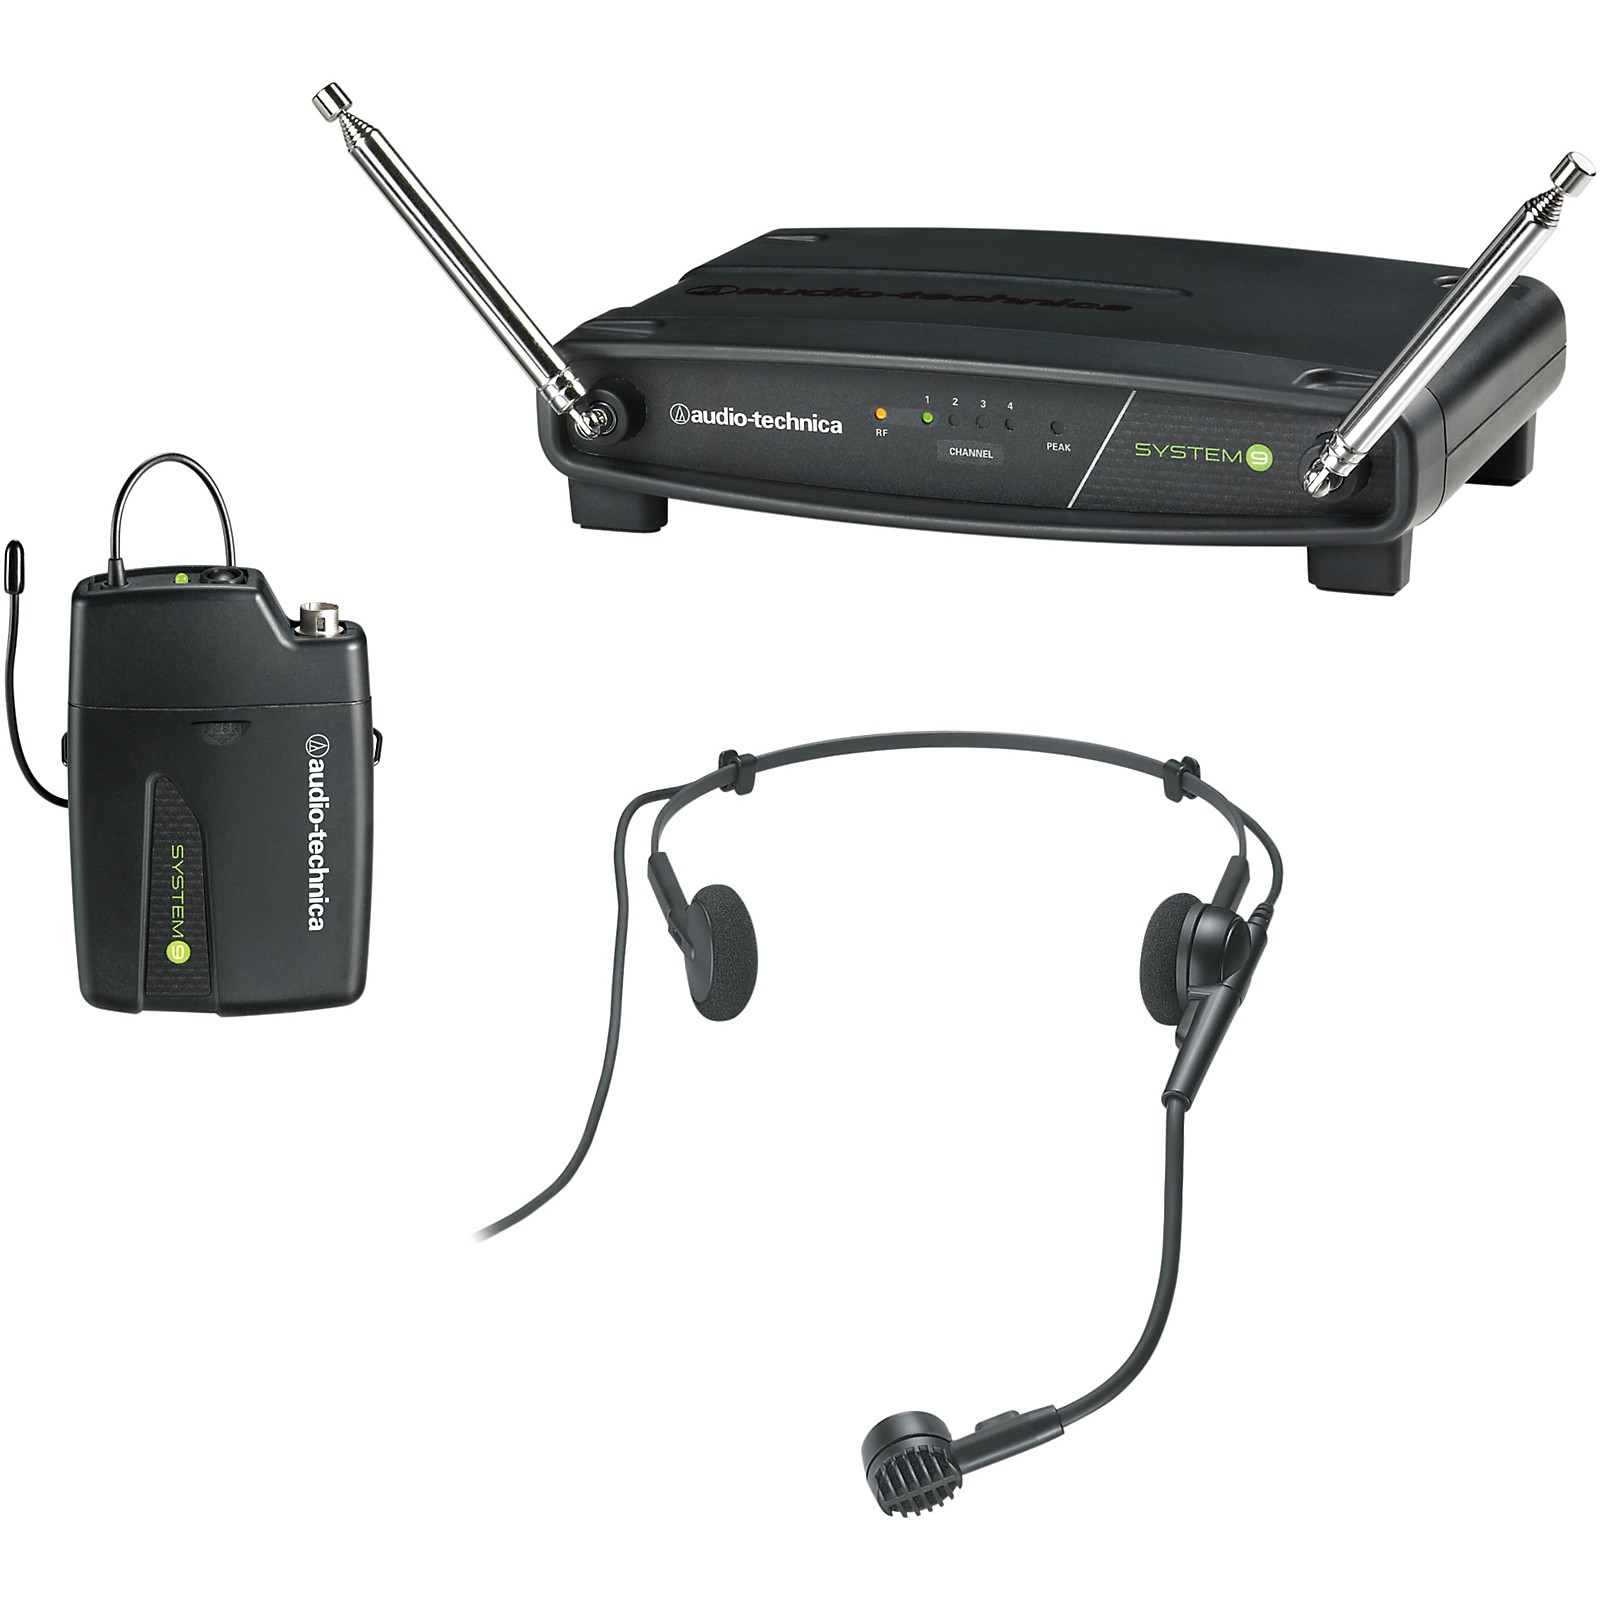 laptop wireless headset with microphone